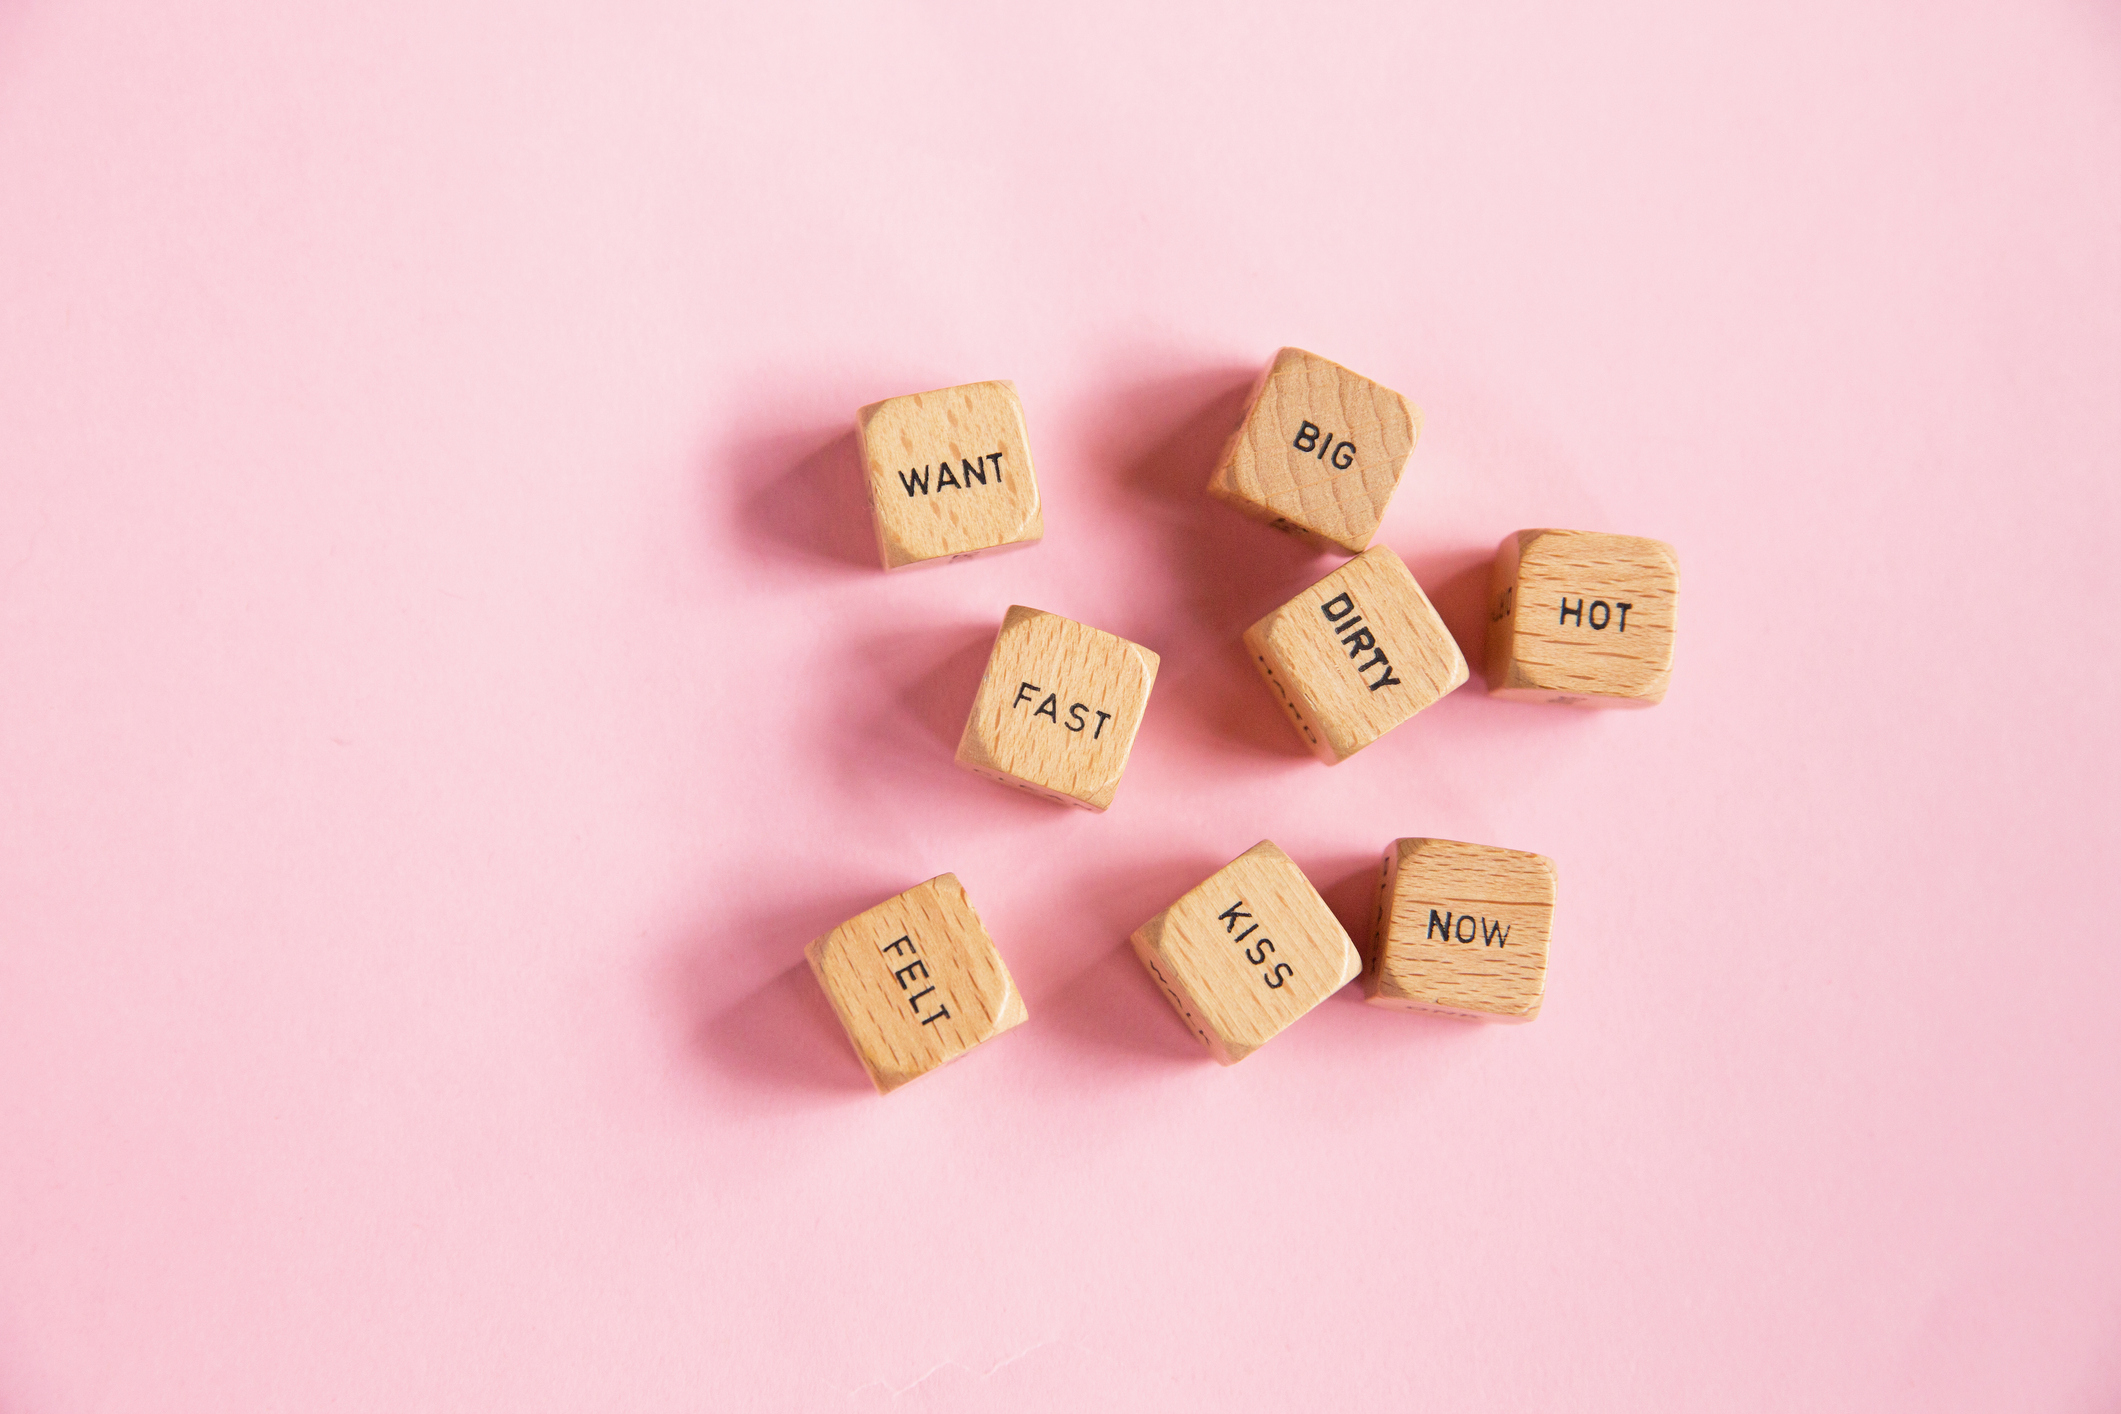 Wooden blocks with romantic and flirtatious words on a plain background